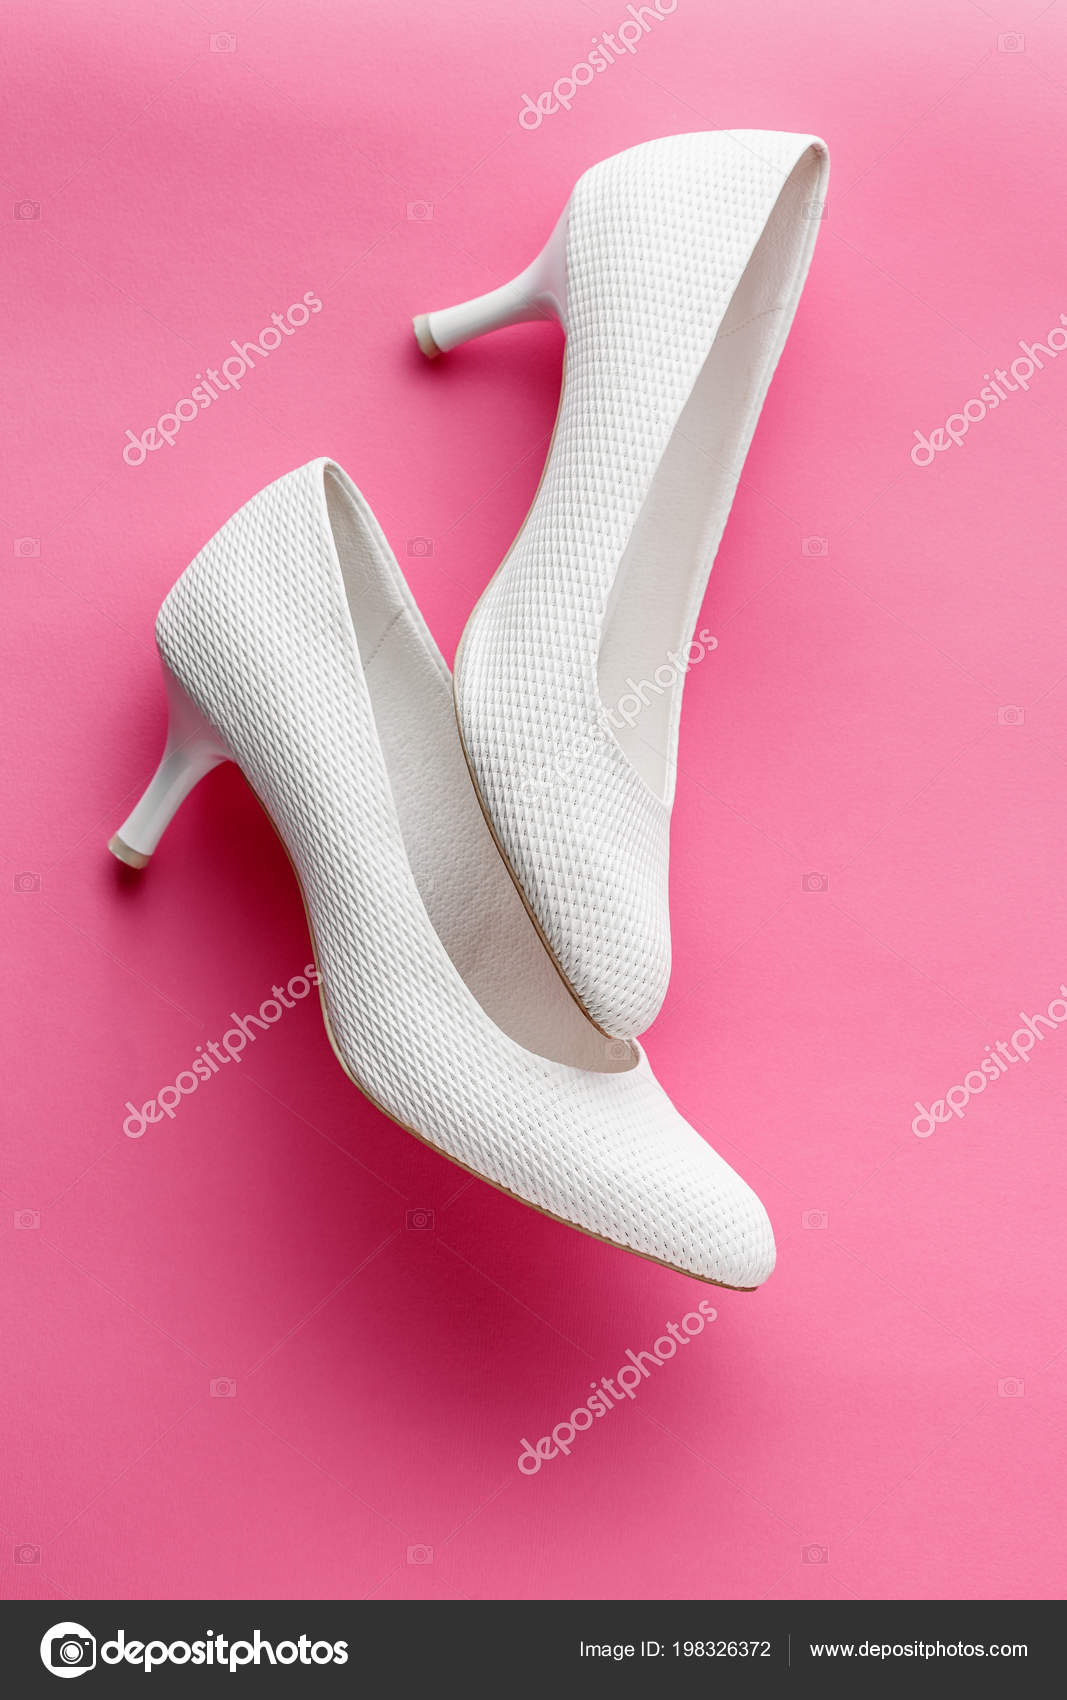 simple white wedding shoes